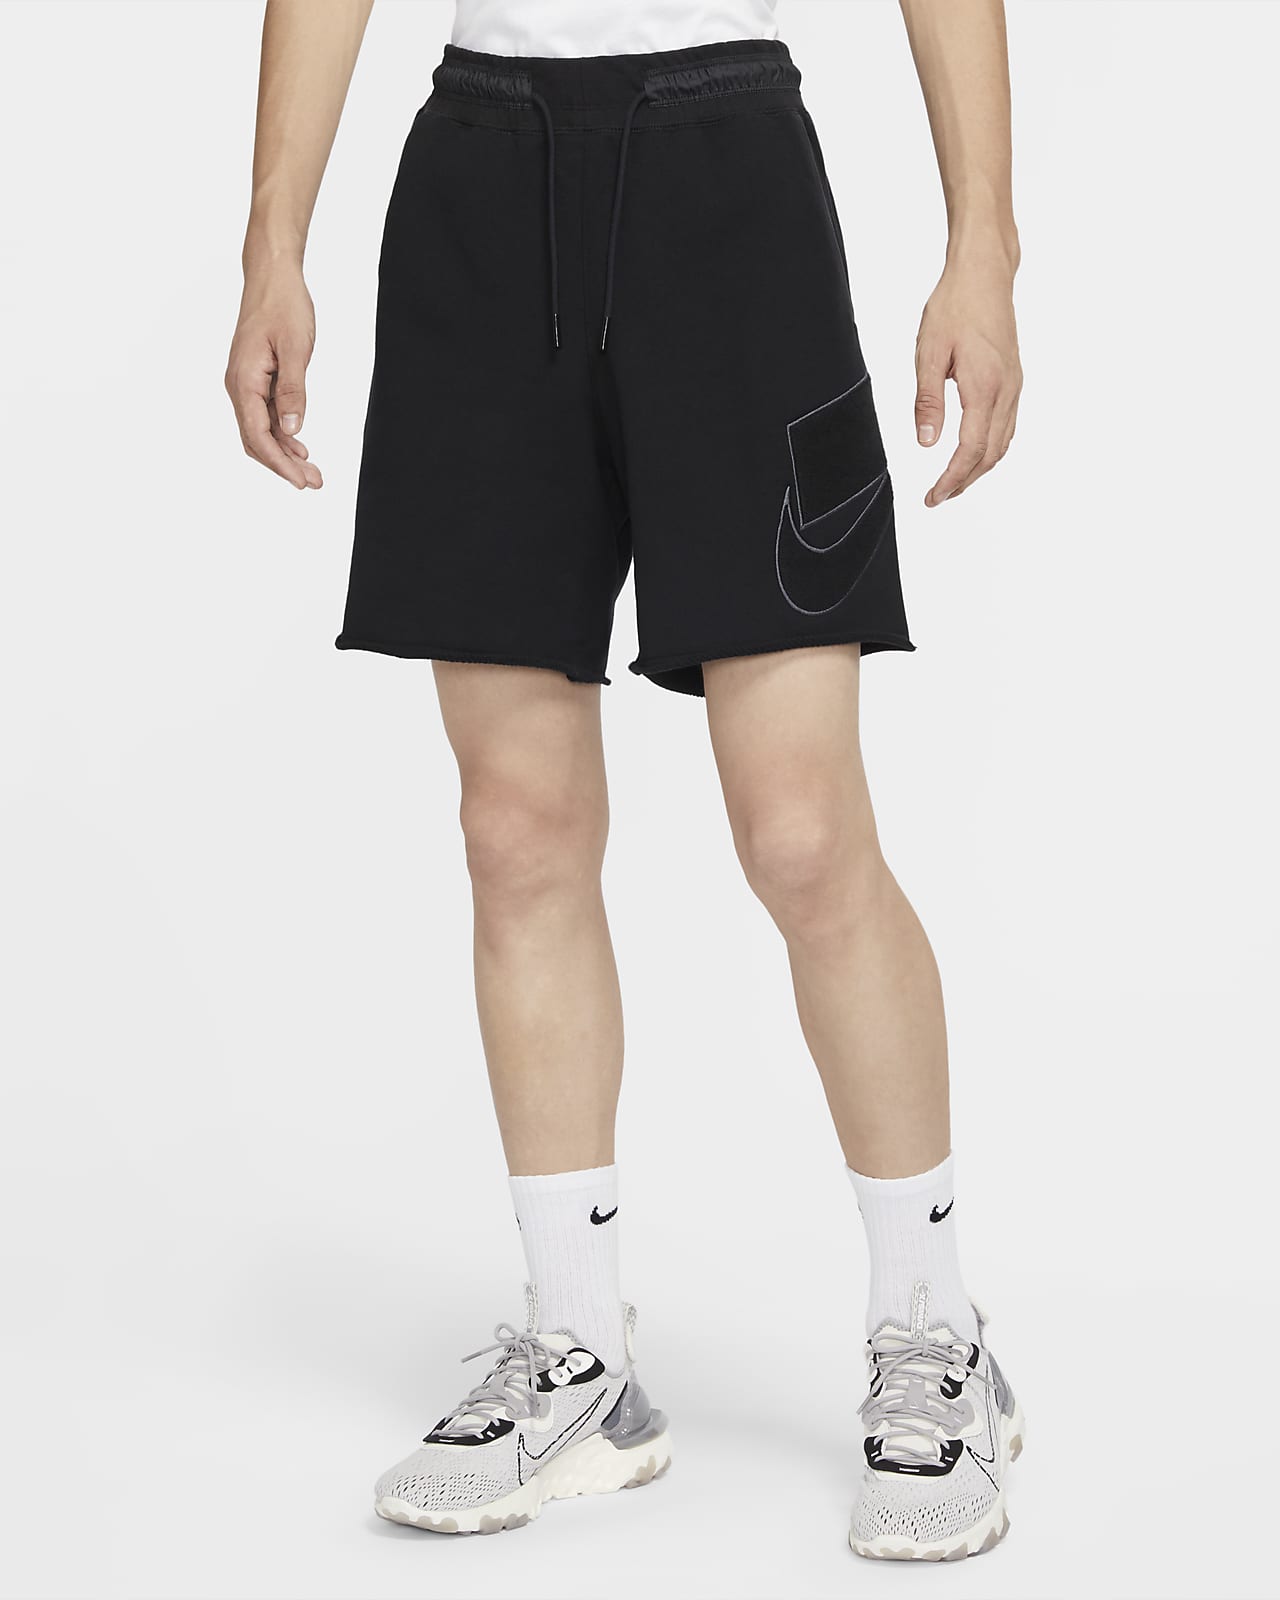 men's french terry shorts nike